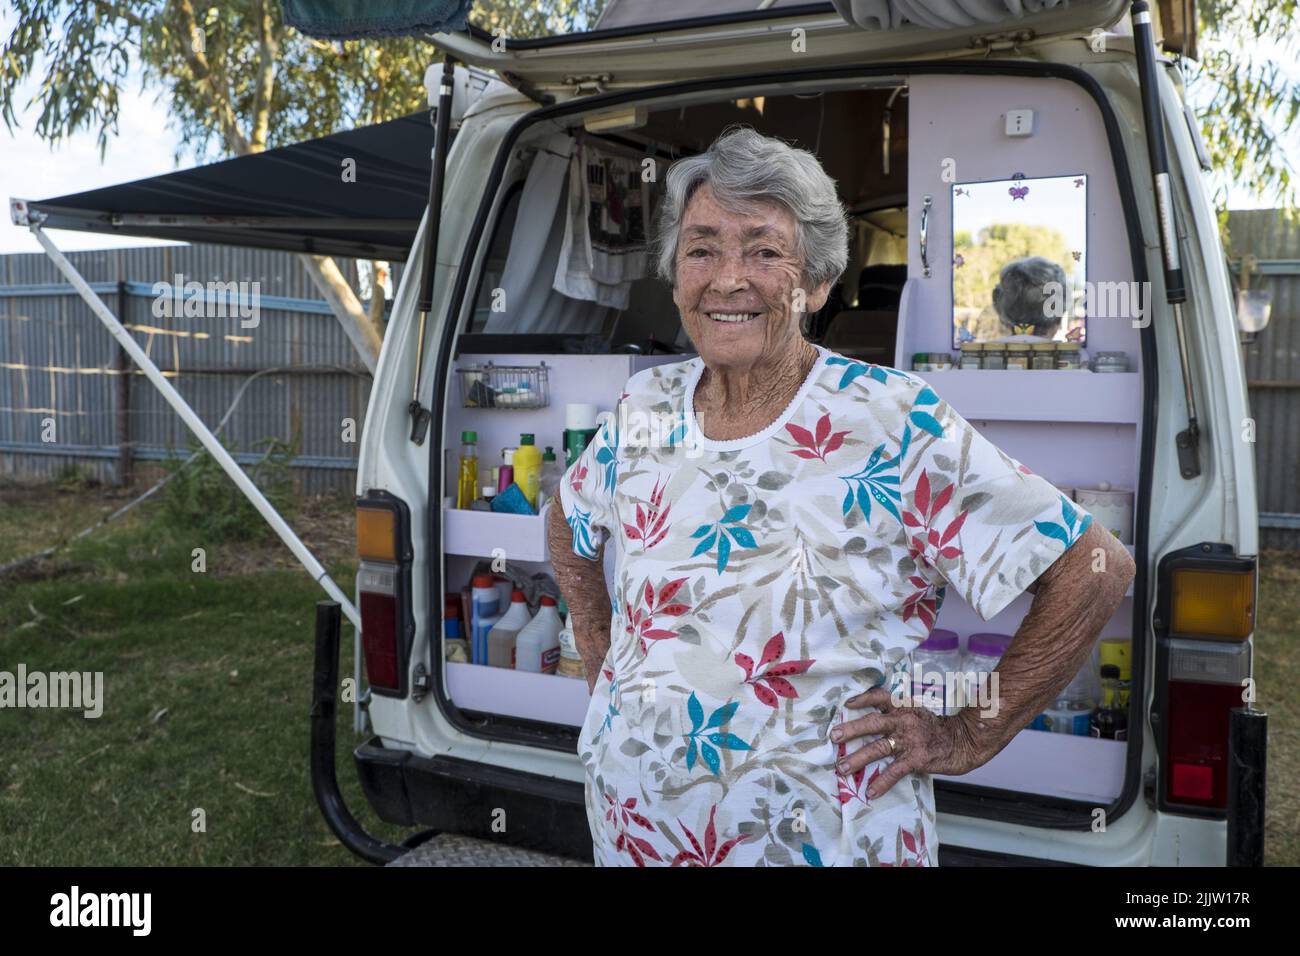 84 year old, traveler, pensioner, Thelma Evans with her Toyota Hi-Ace van in the tourist park in Winton, Queensland.   In 1988 while traveling around Ausralia in a caravan with her husband, Thelma became a widow. After a period of mourning she decided to keep traveling. She replaced the caravan with a more easily handled van and since that time she has driven over 400,000 km crisscrossing the country. She has travelled the Gibb River Road, five times and has an encyclopeadic knowledge of the roads, rivers, mountains, billabongs and campsites of Australia.  Her campervan, fitted out by her carp Stock Photo